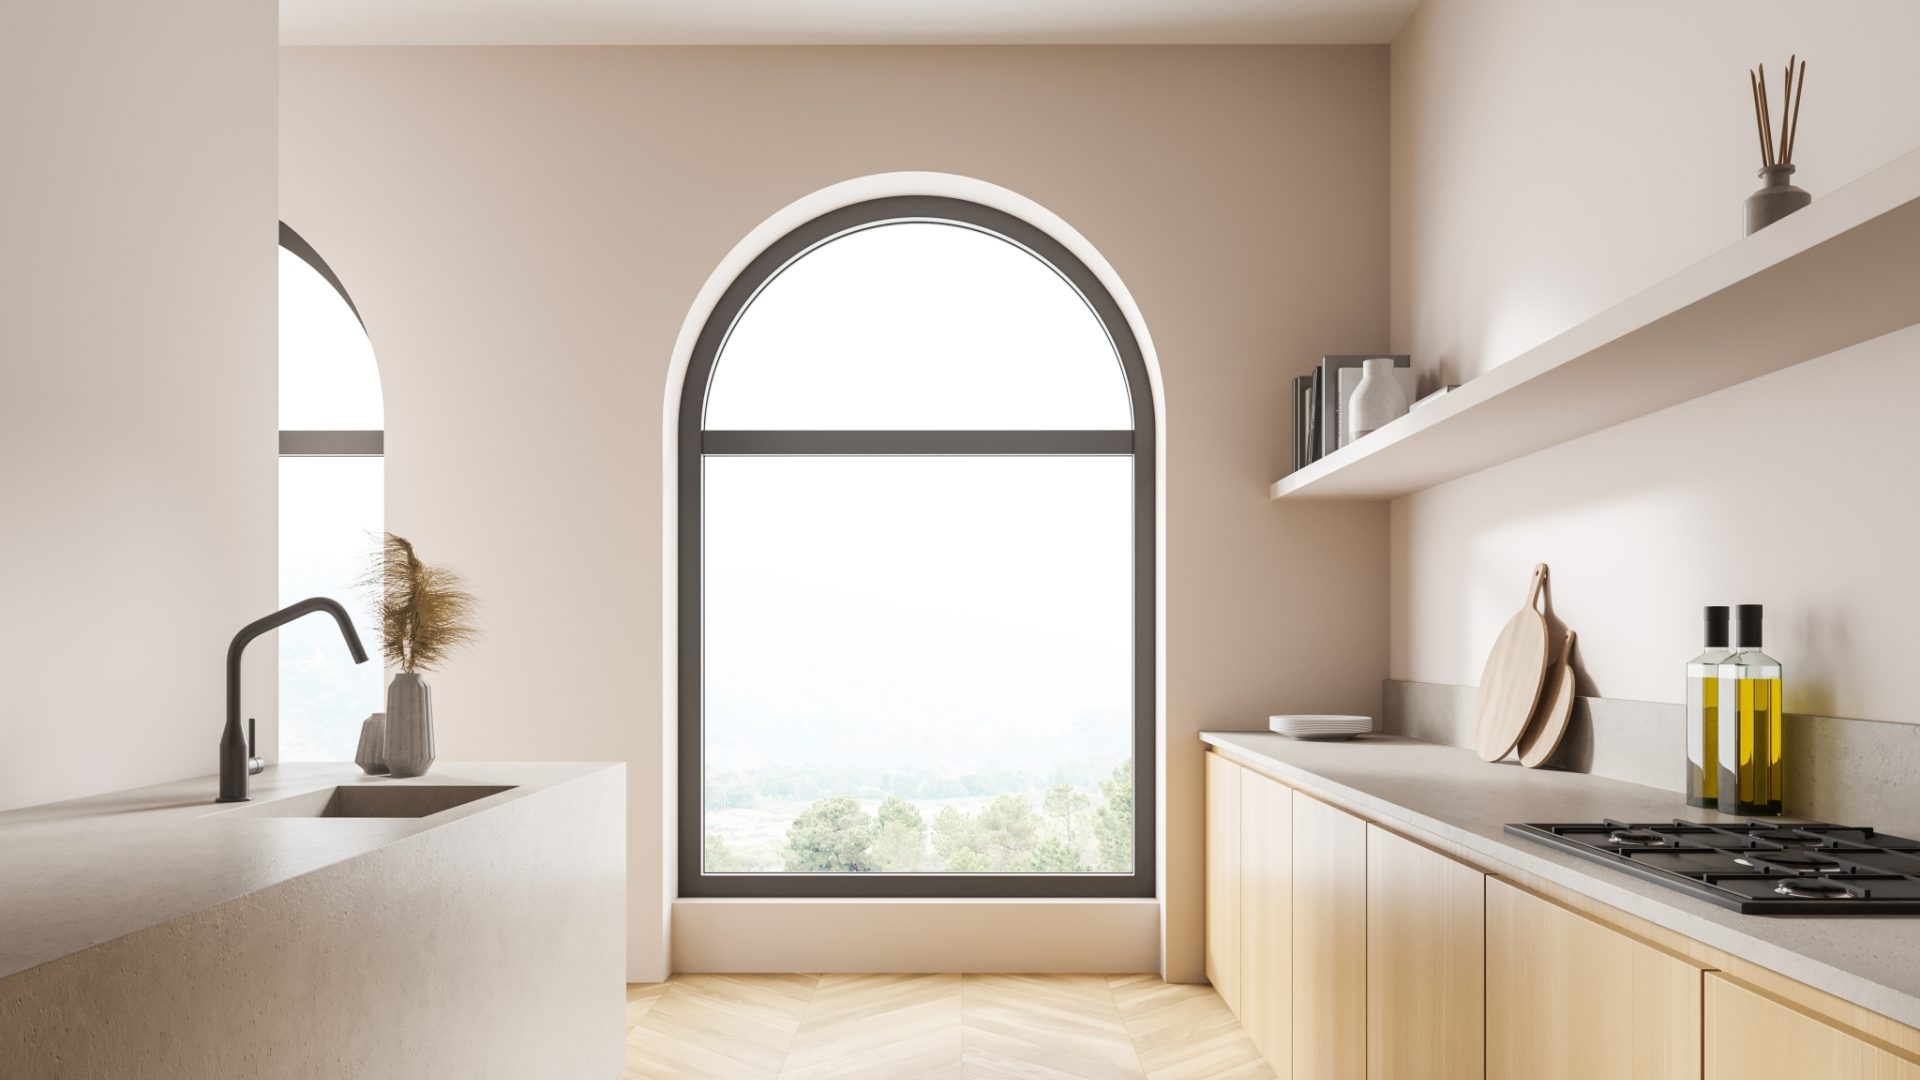 Large arched window with dark grey frames, in a modern and minimalist kitchen